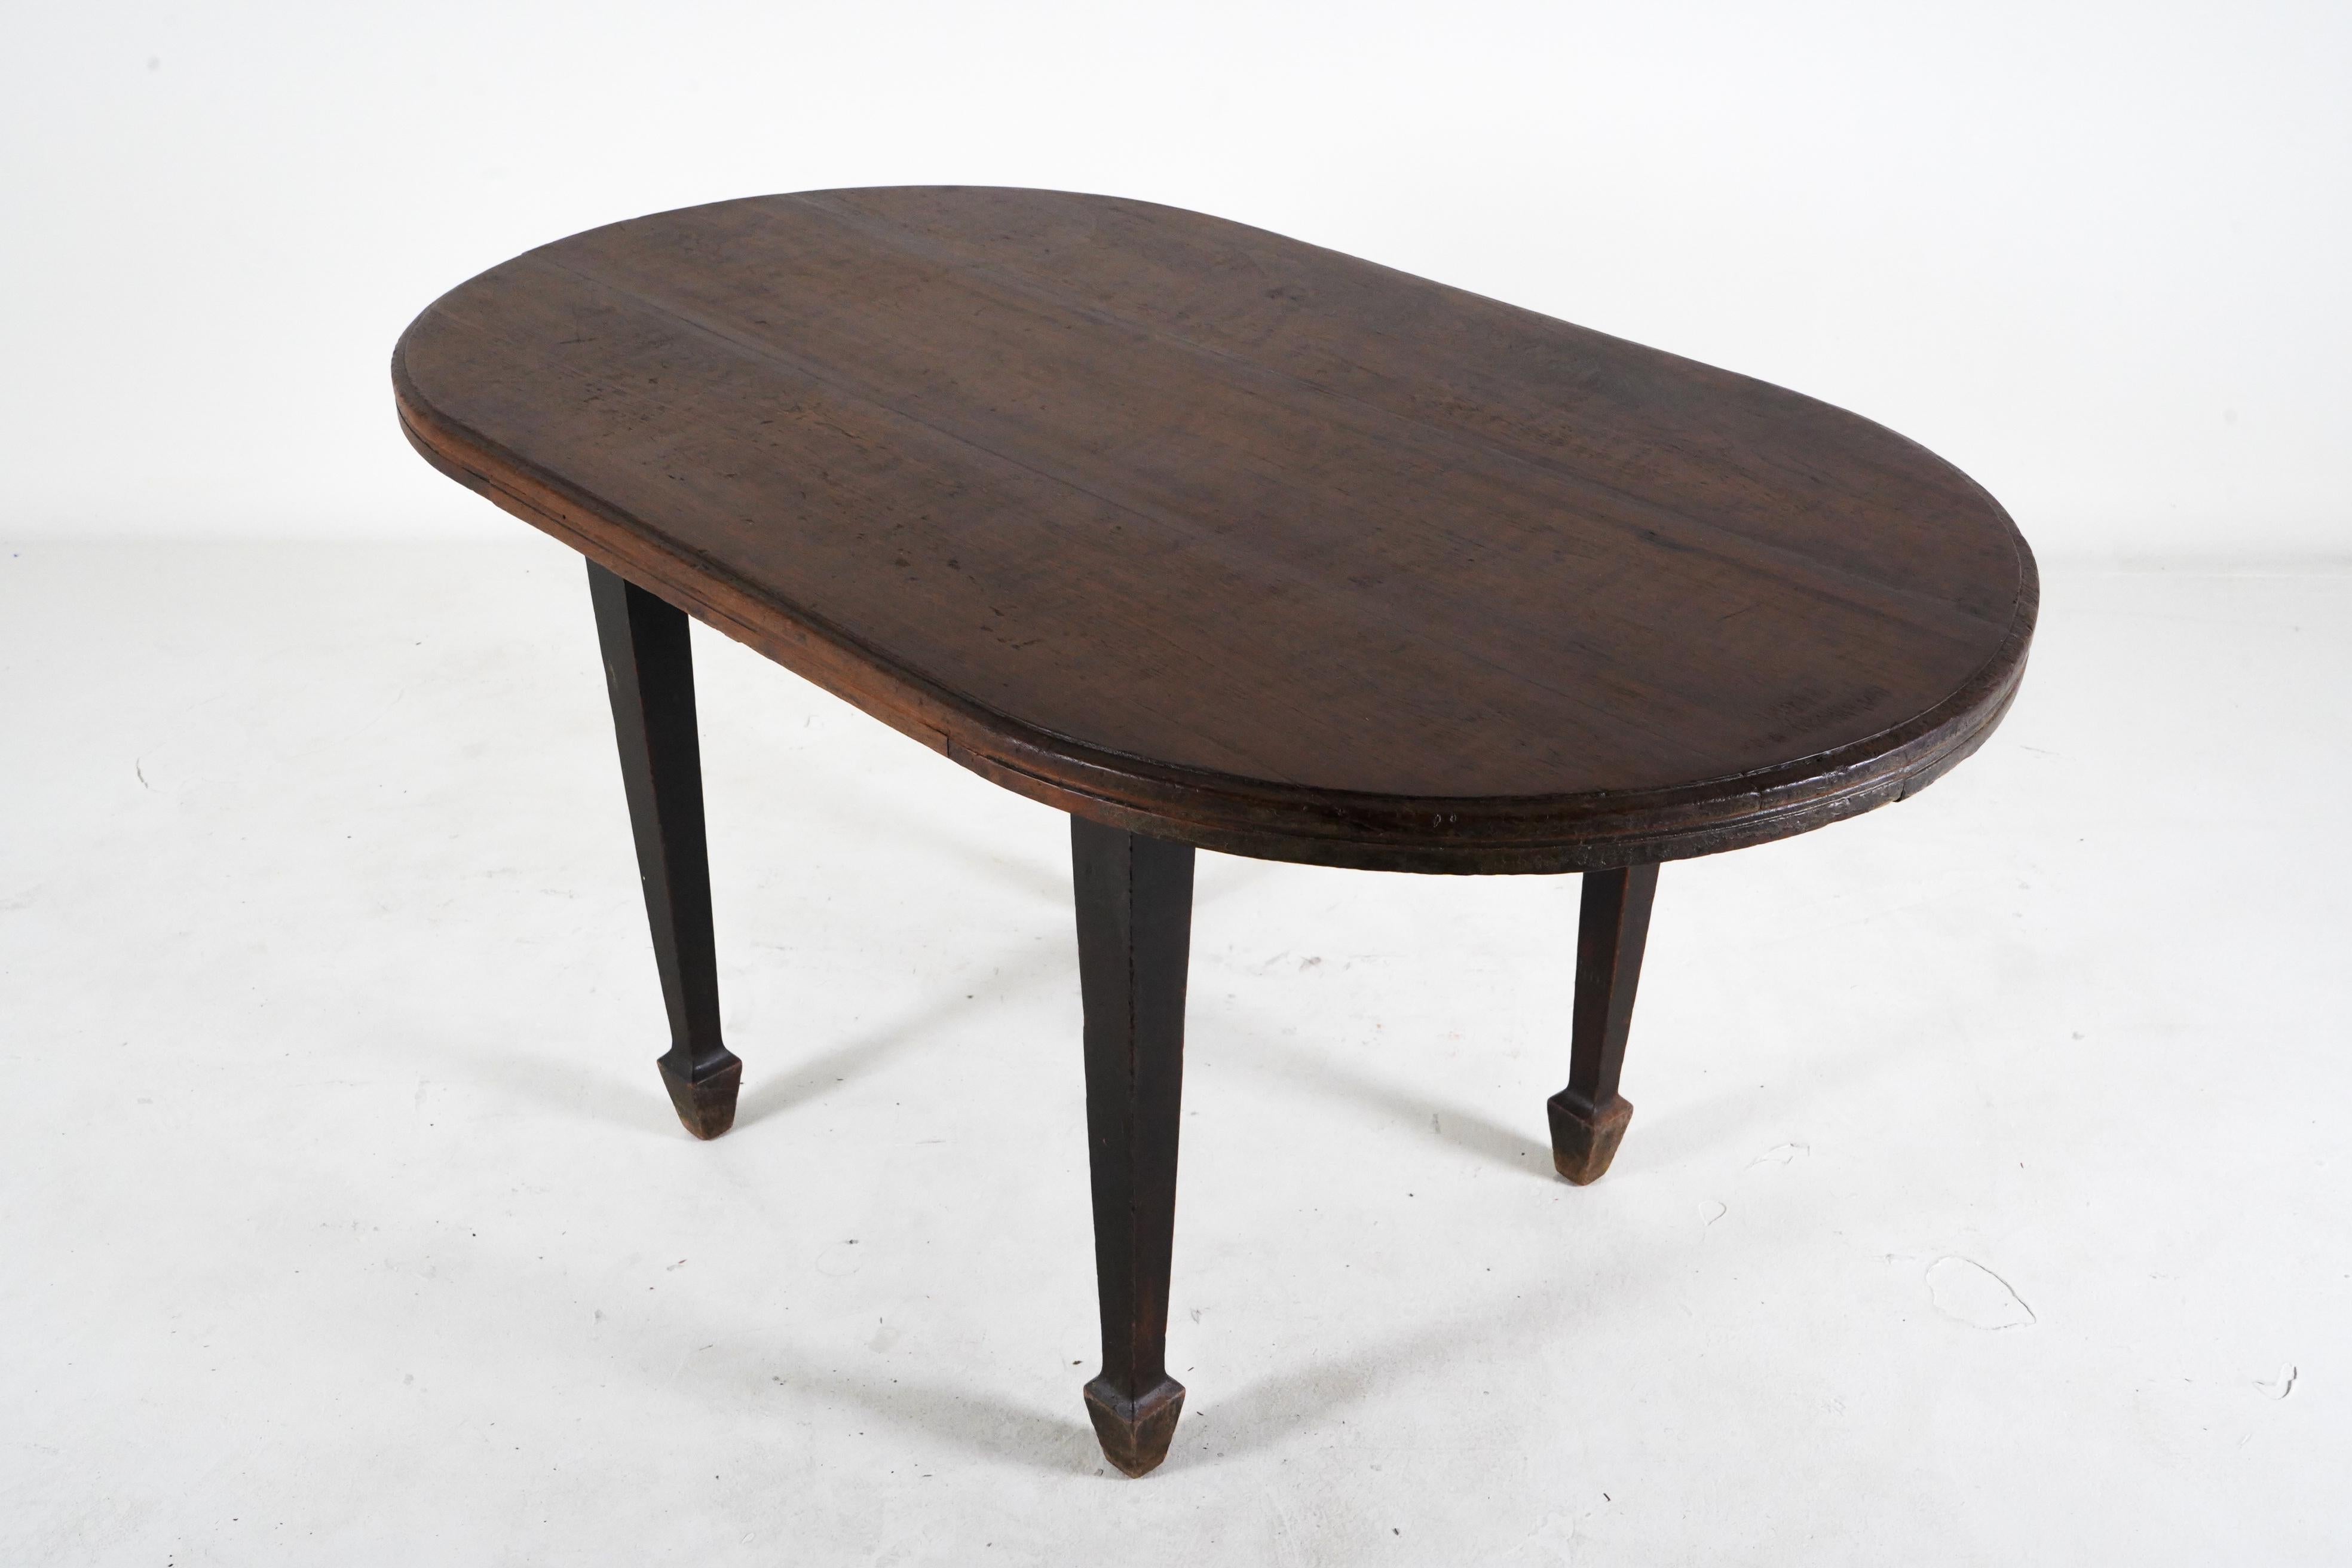 British Colonial A Teak Wood Oval Dining Table For Sale